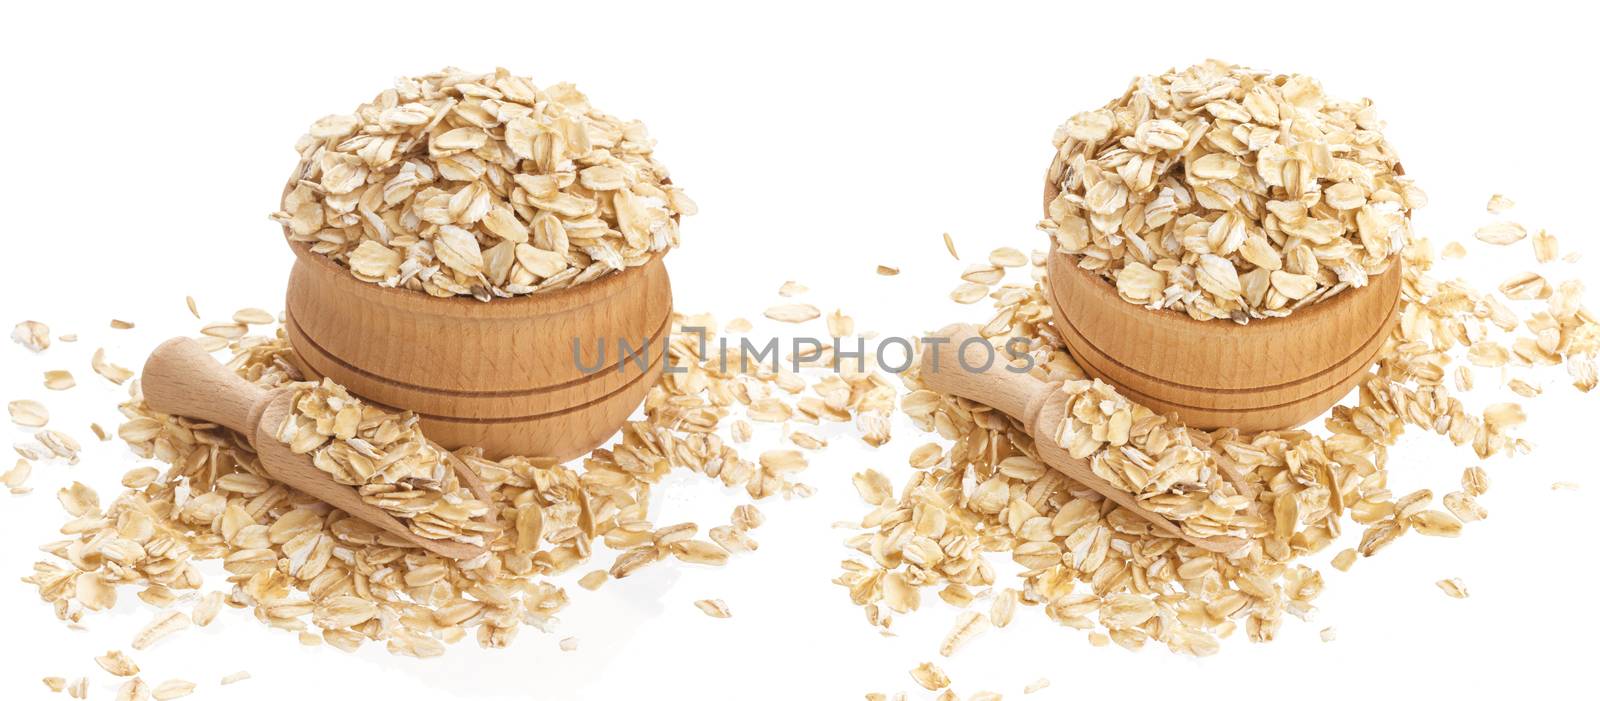 Oat flakes in wooden bowl isolated on white background by xamtiw